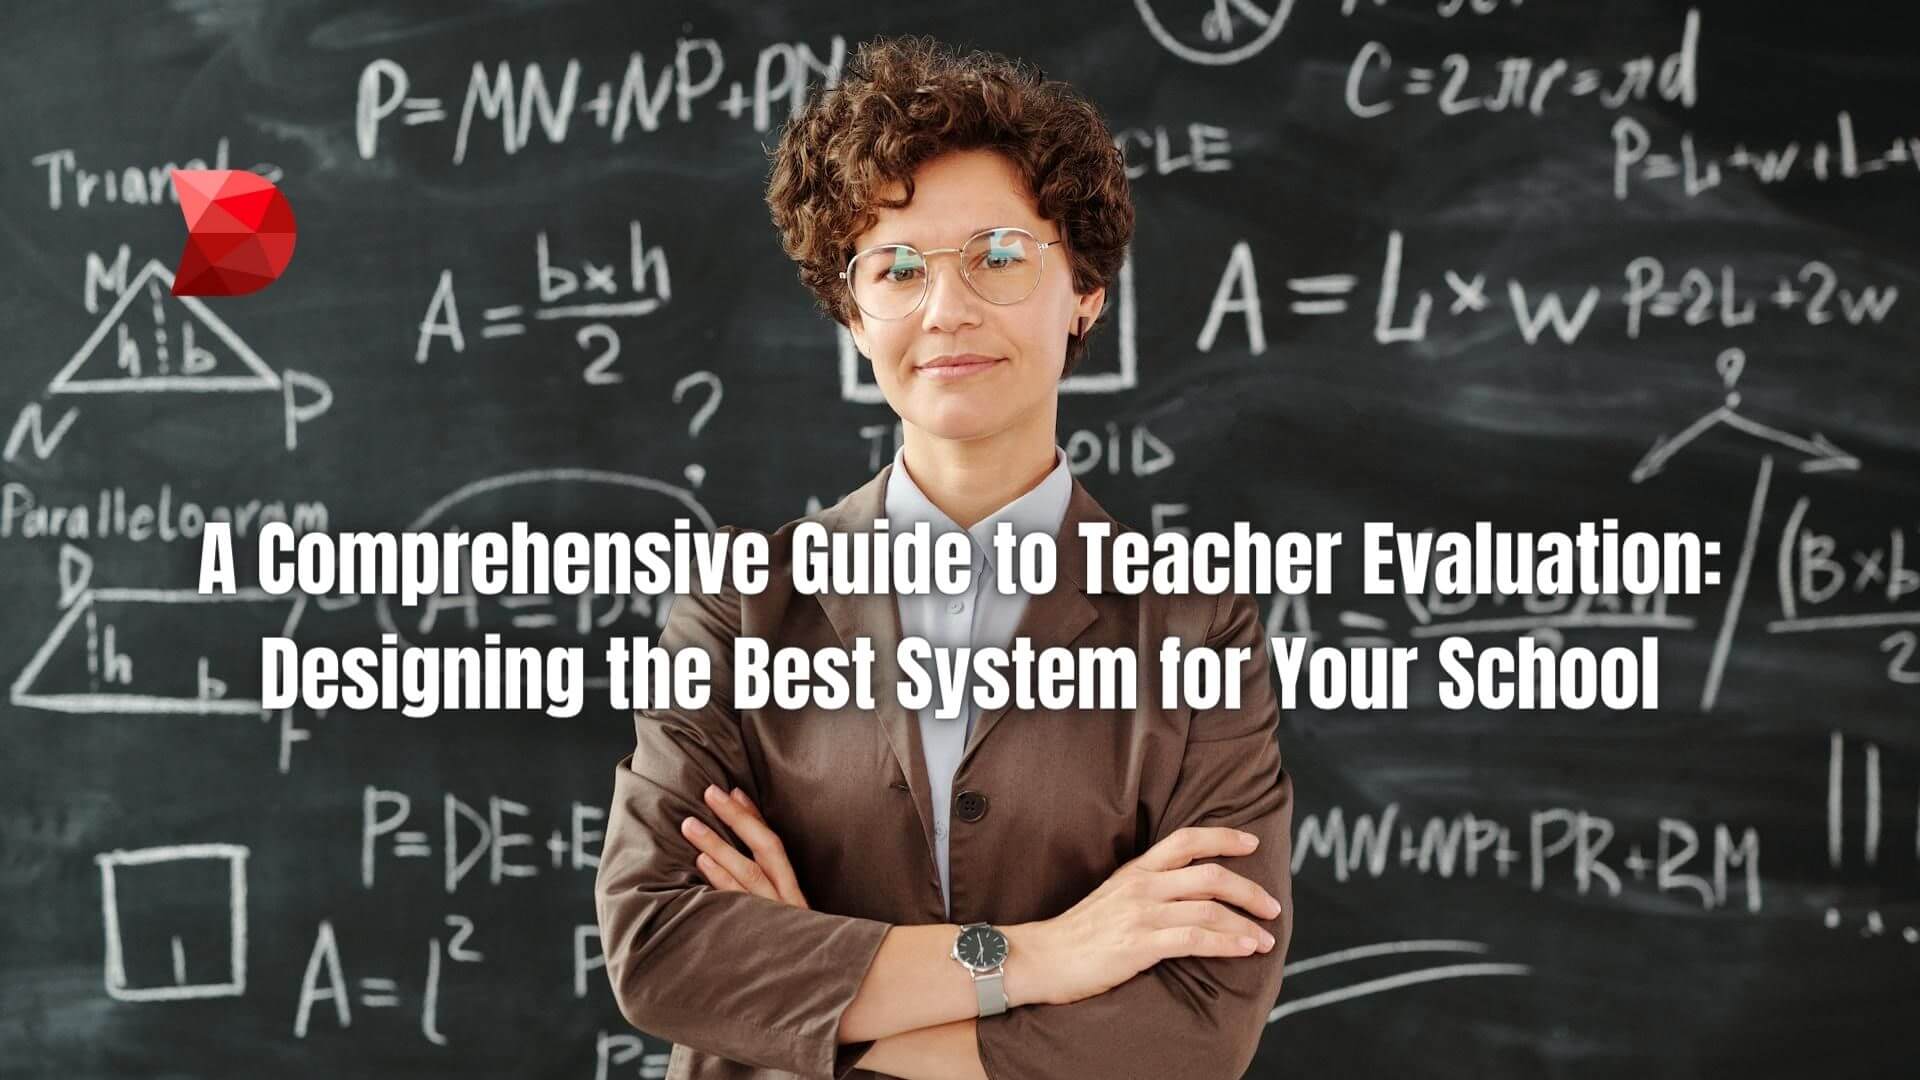 Unlock the secrets of teacher evaluation with our guide. Learn best practices, tools, and strategies for effective teacher assessments.